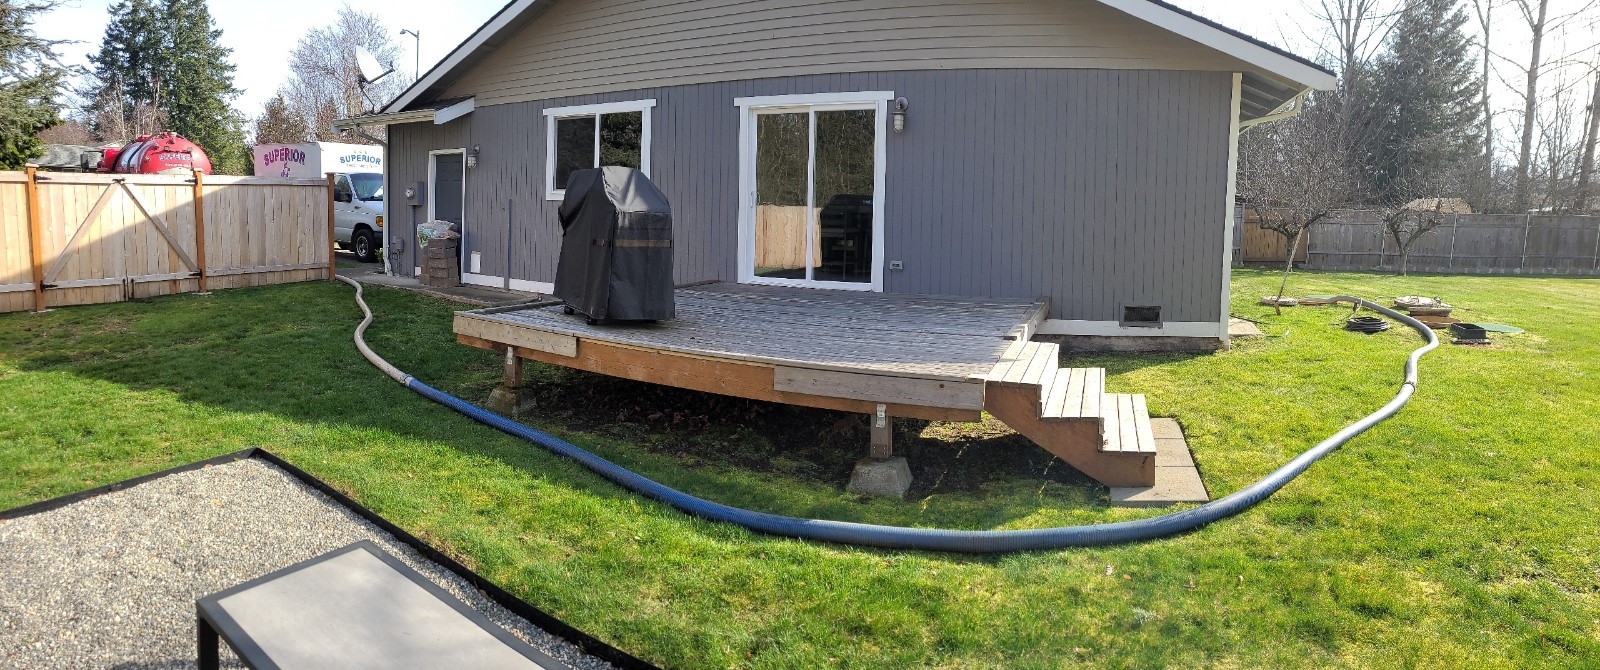 Septic System Misconceptions Lake Stevens Residents Need to Understand